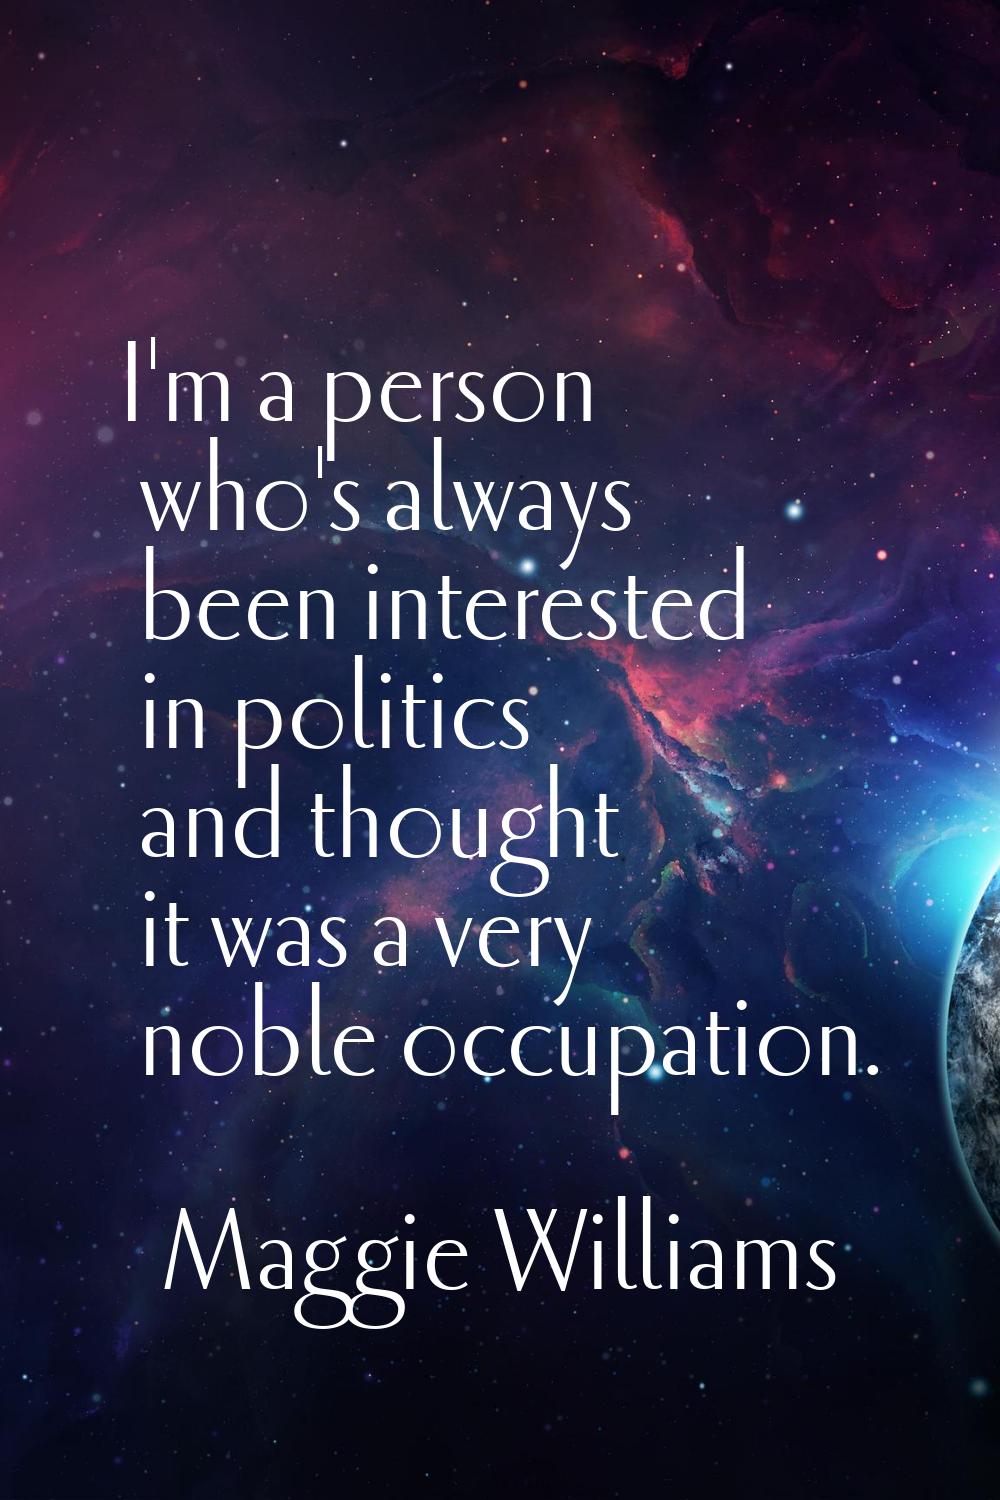 I'm a person who's always been interested in politics and thought it was a very noble occupation.